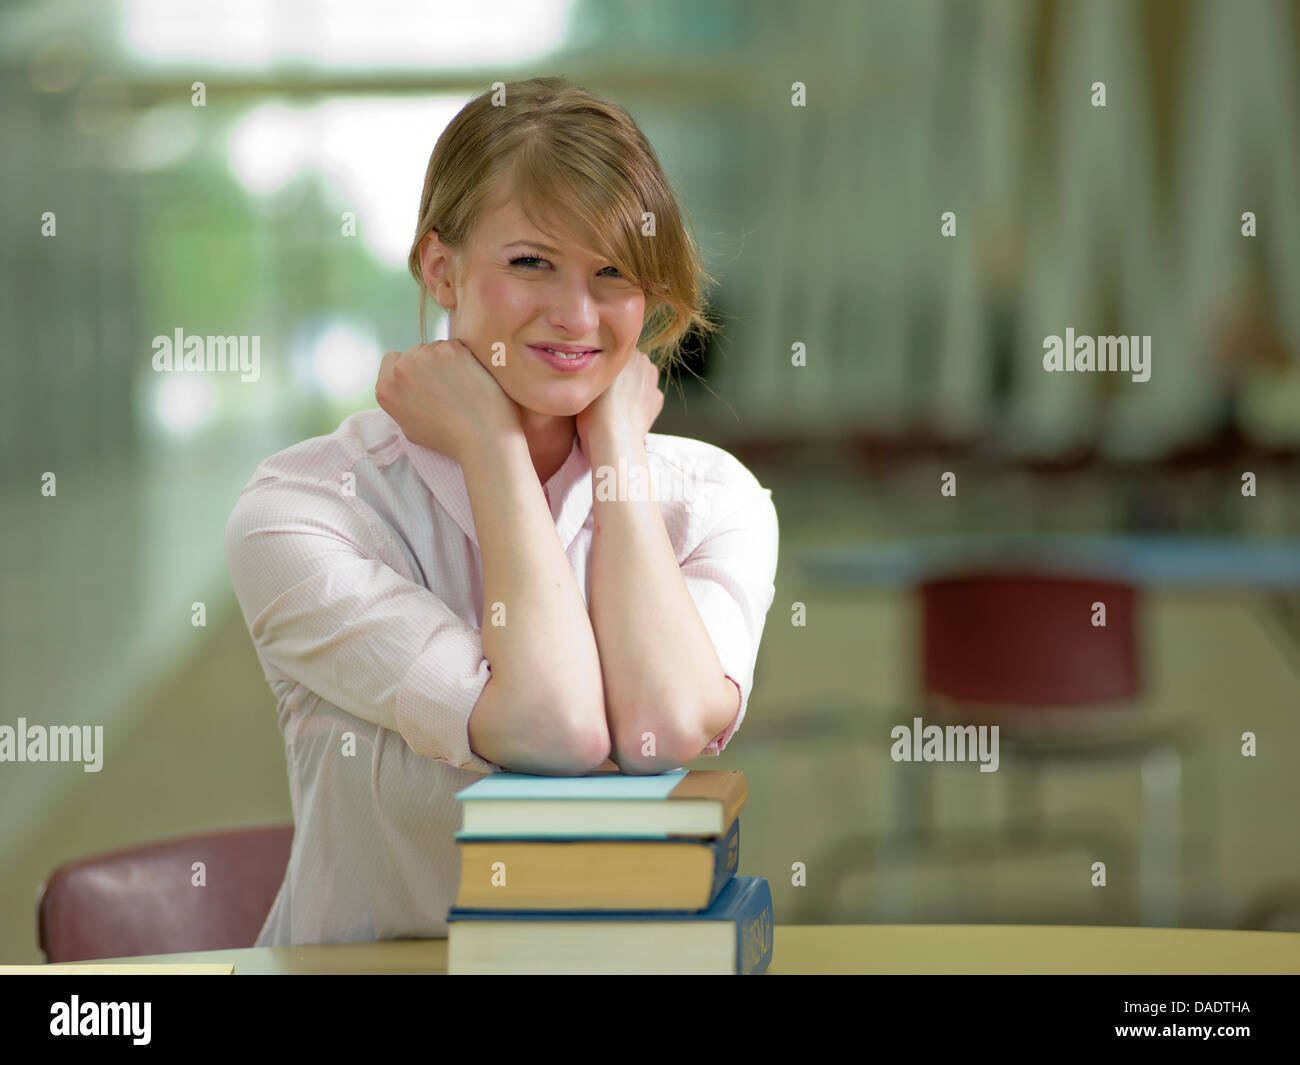 Young student leaning on school books, portrait Stock Photo